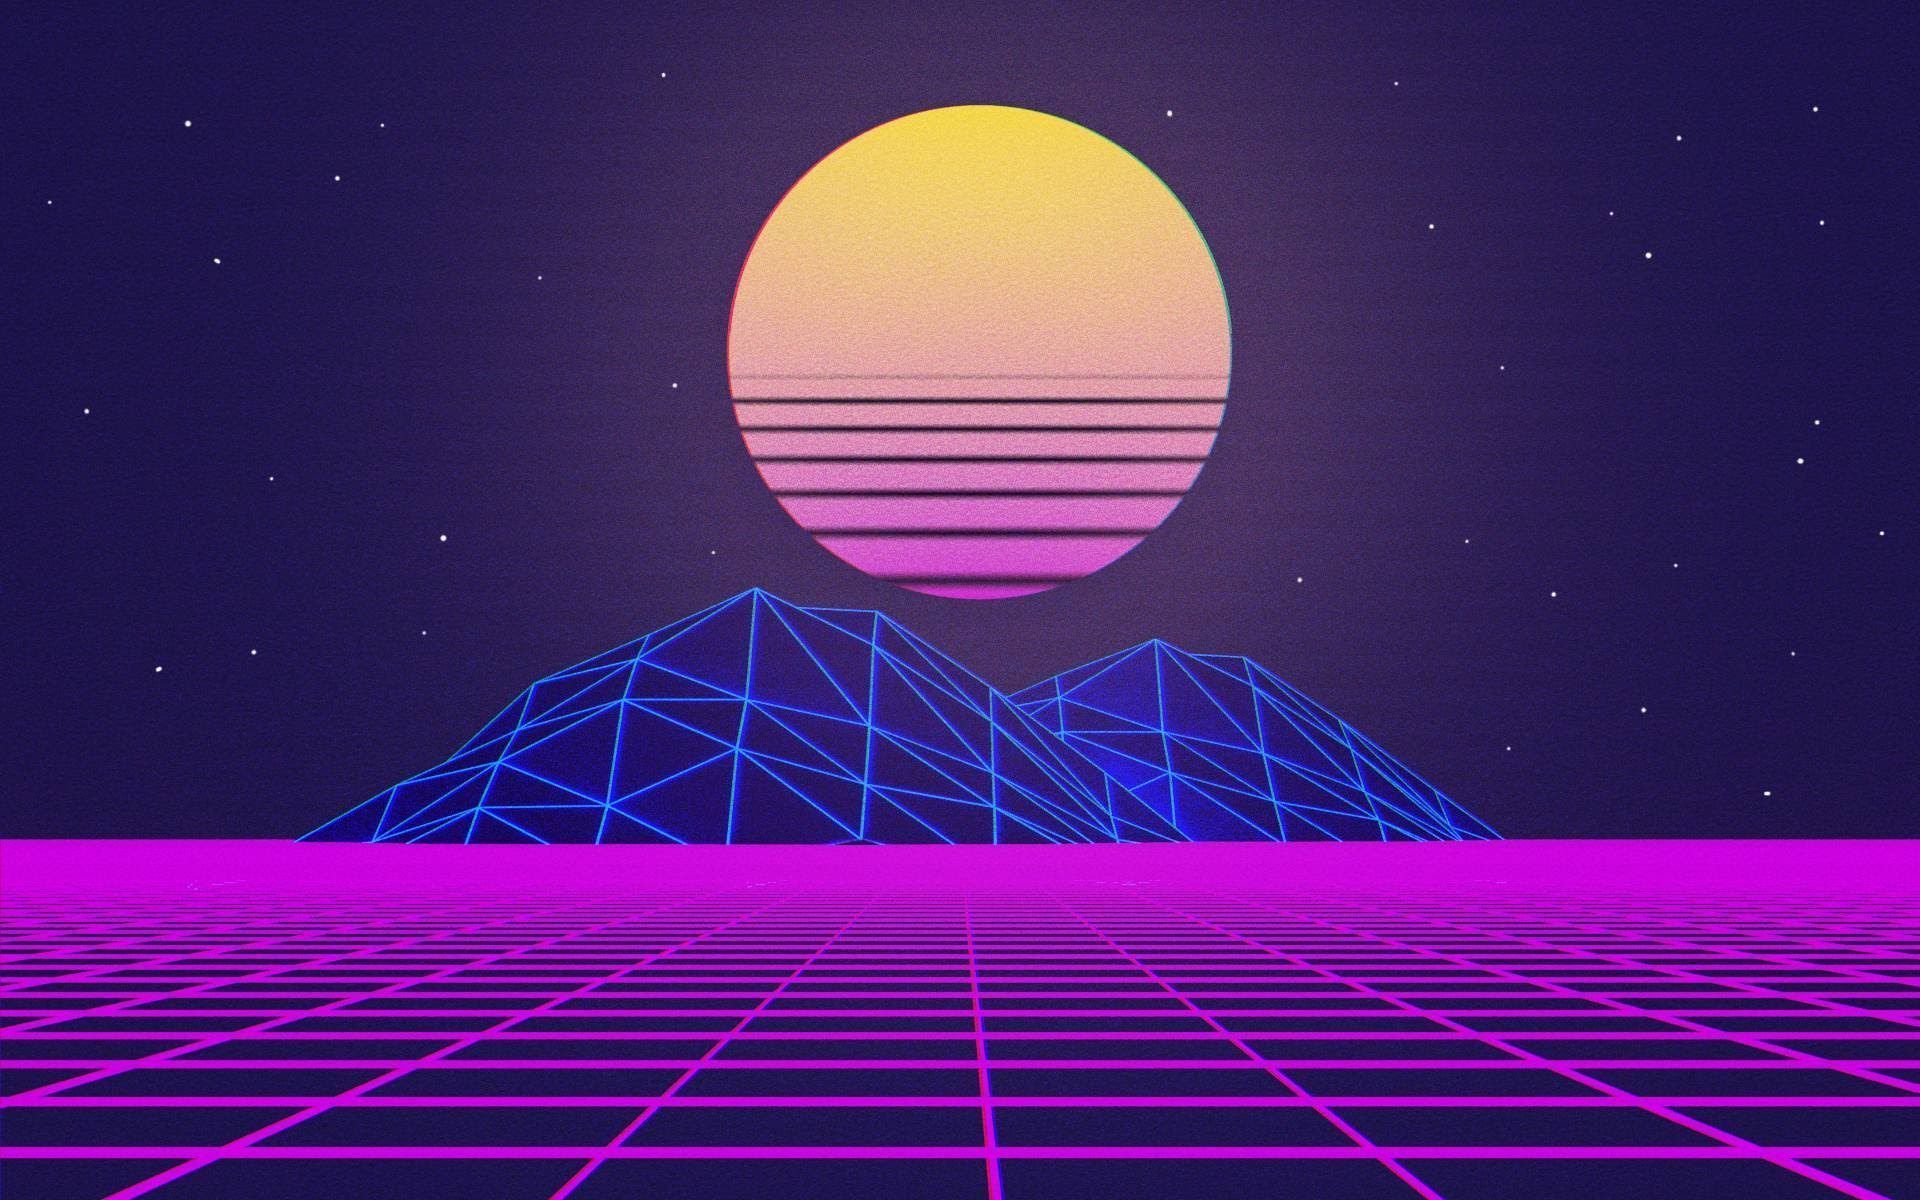 A retro style image with mountains and sunset - Indie